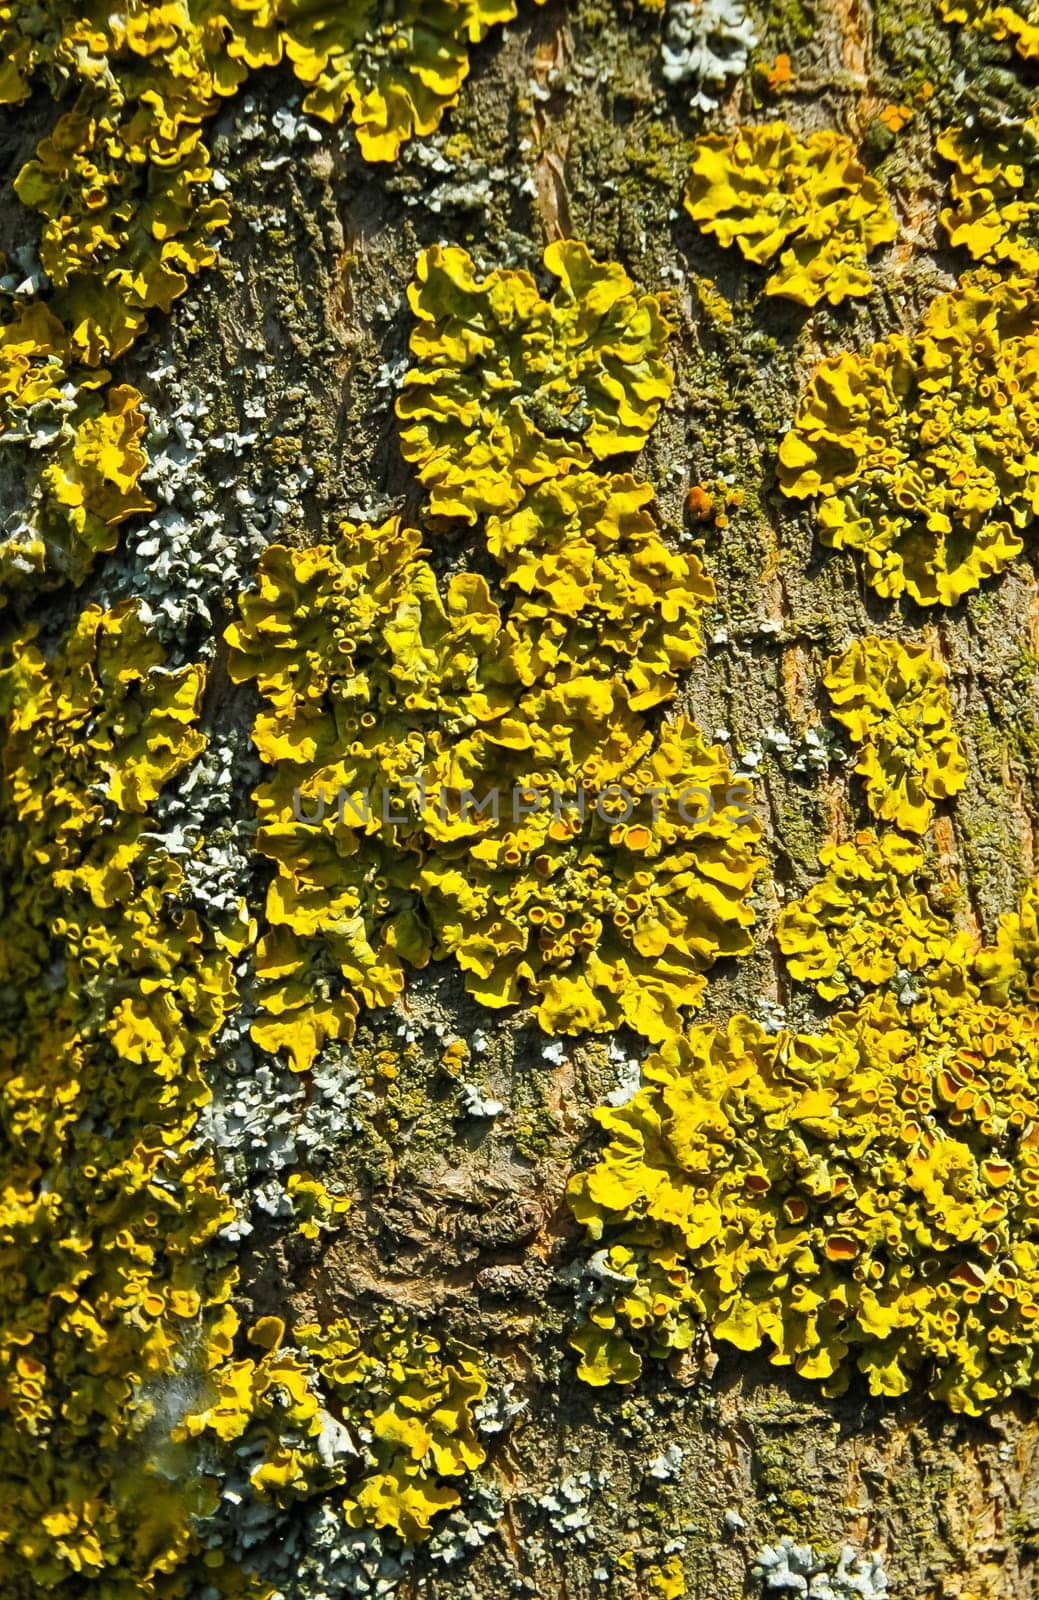 Yellow lichen on the trunk of an old tree, symbiosis of fungus and algae